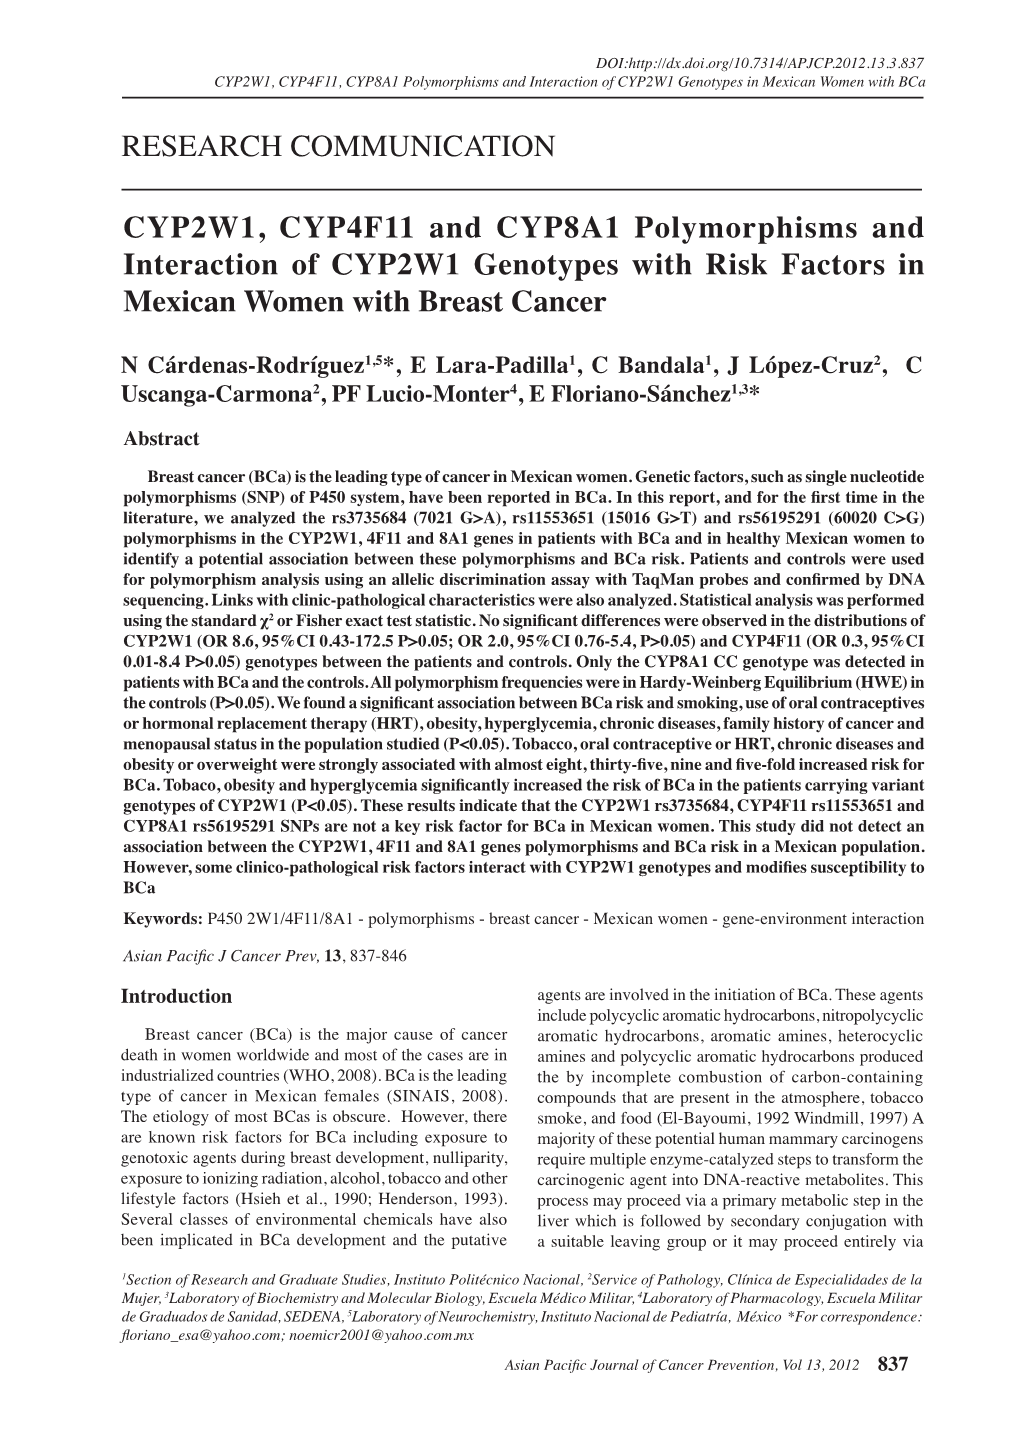 RESEARCH COMMUNICATION CYP2W1, CYP4F11 and CYP8A1